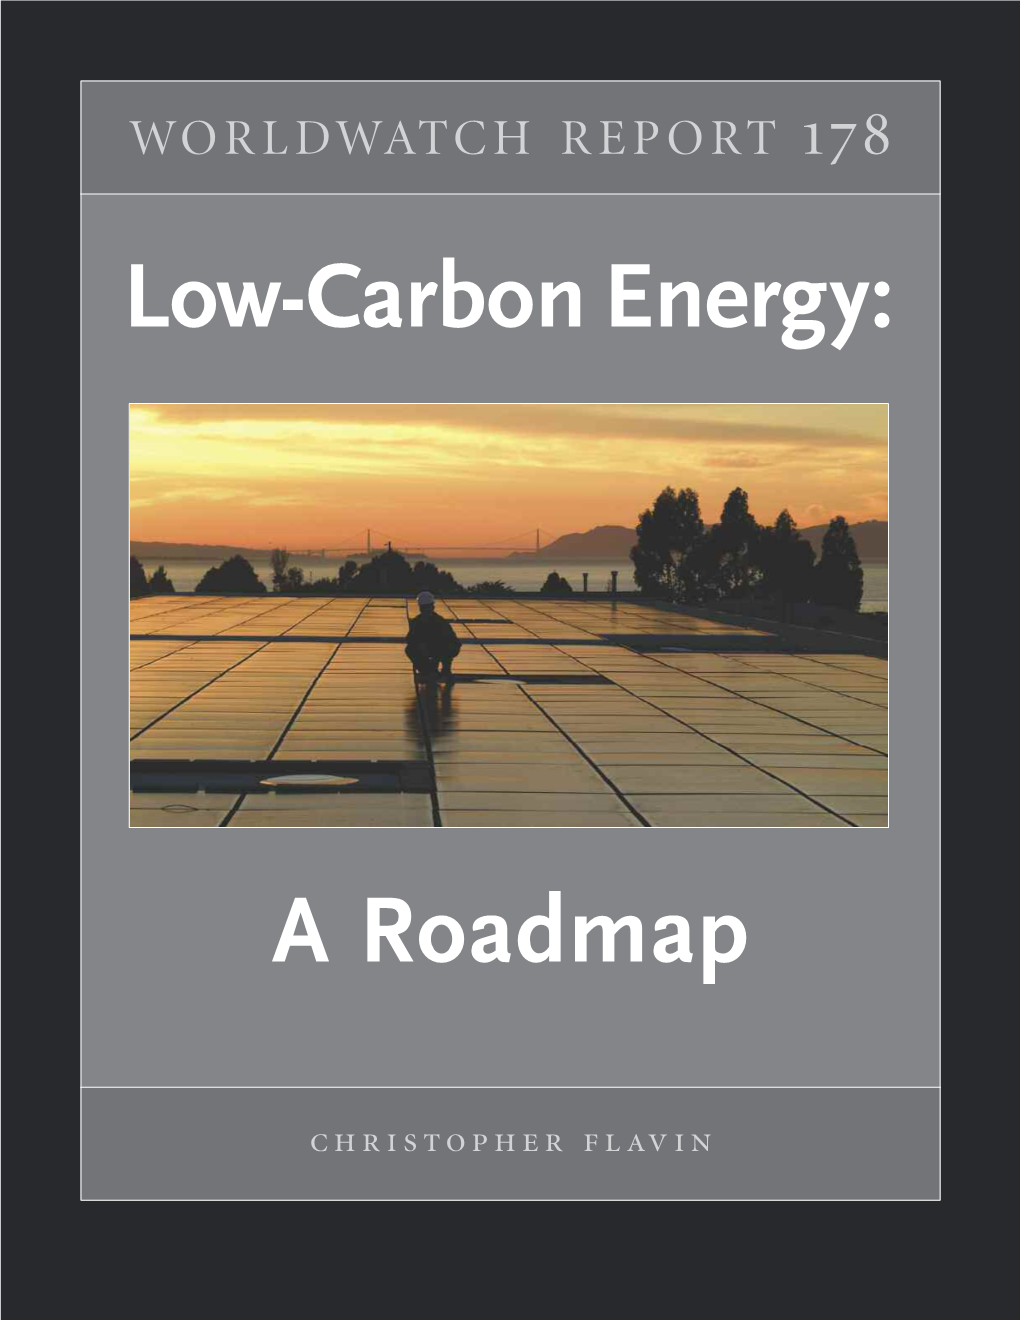 Low-Carbon Energy